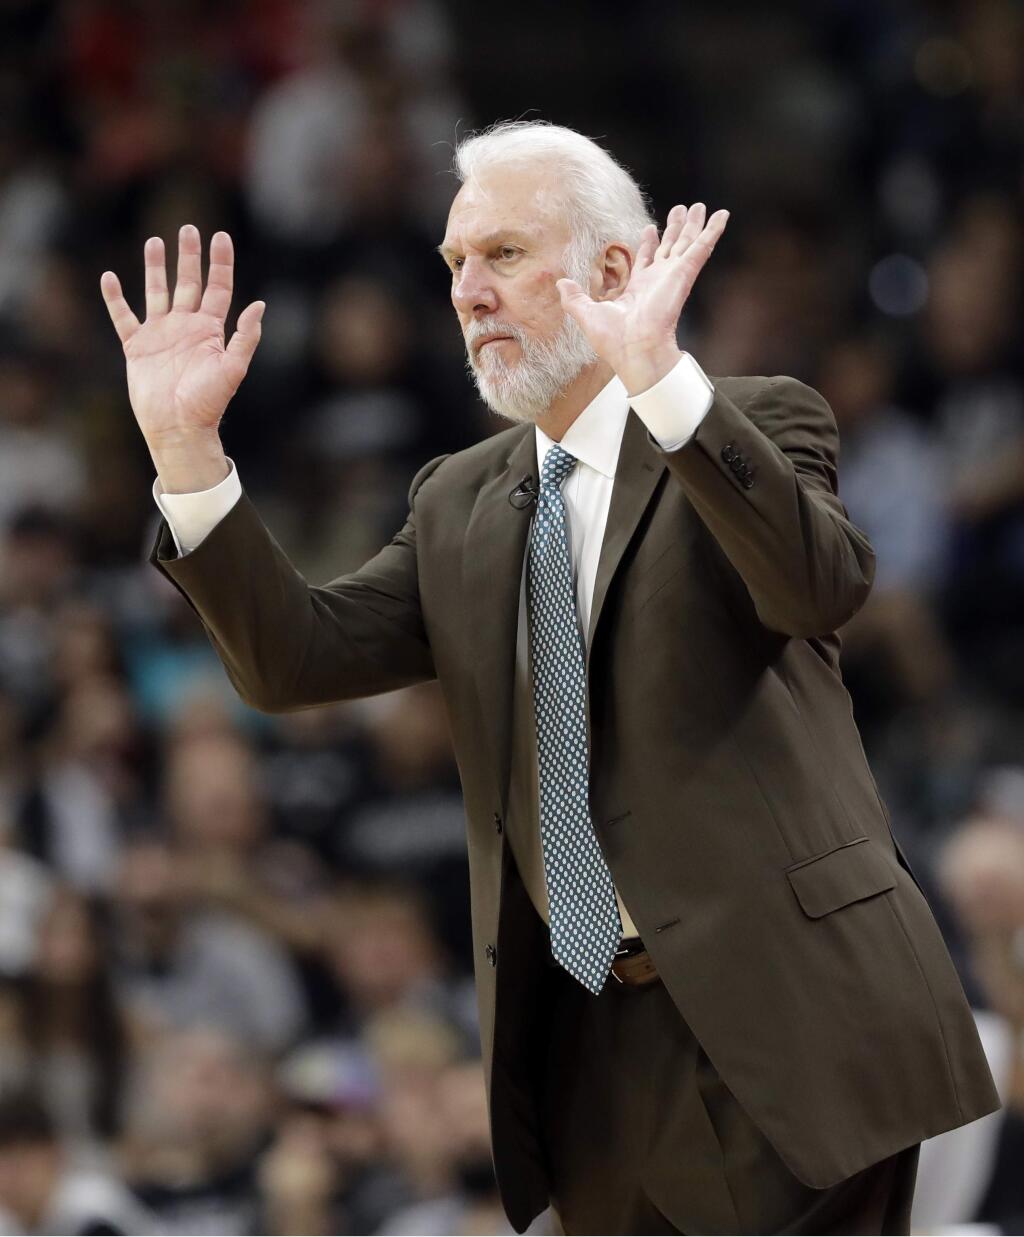 San Antonio Spurs head coach Gregg Popovich reacts to a play against the Houston Rockets during the second half of Game 5 of their second-round playoff series, Tuesday, May 9, 2017, in San Antonio. (AP Photo/Eric Gay)